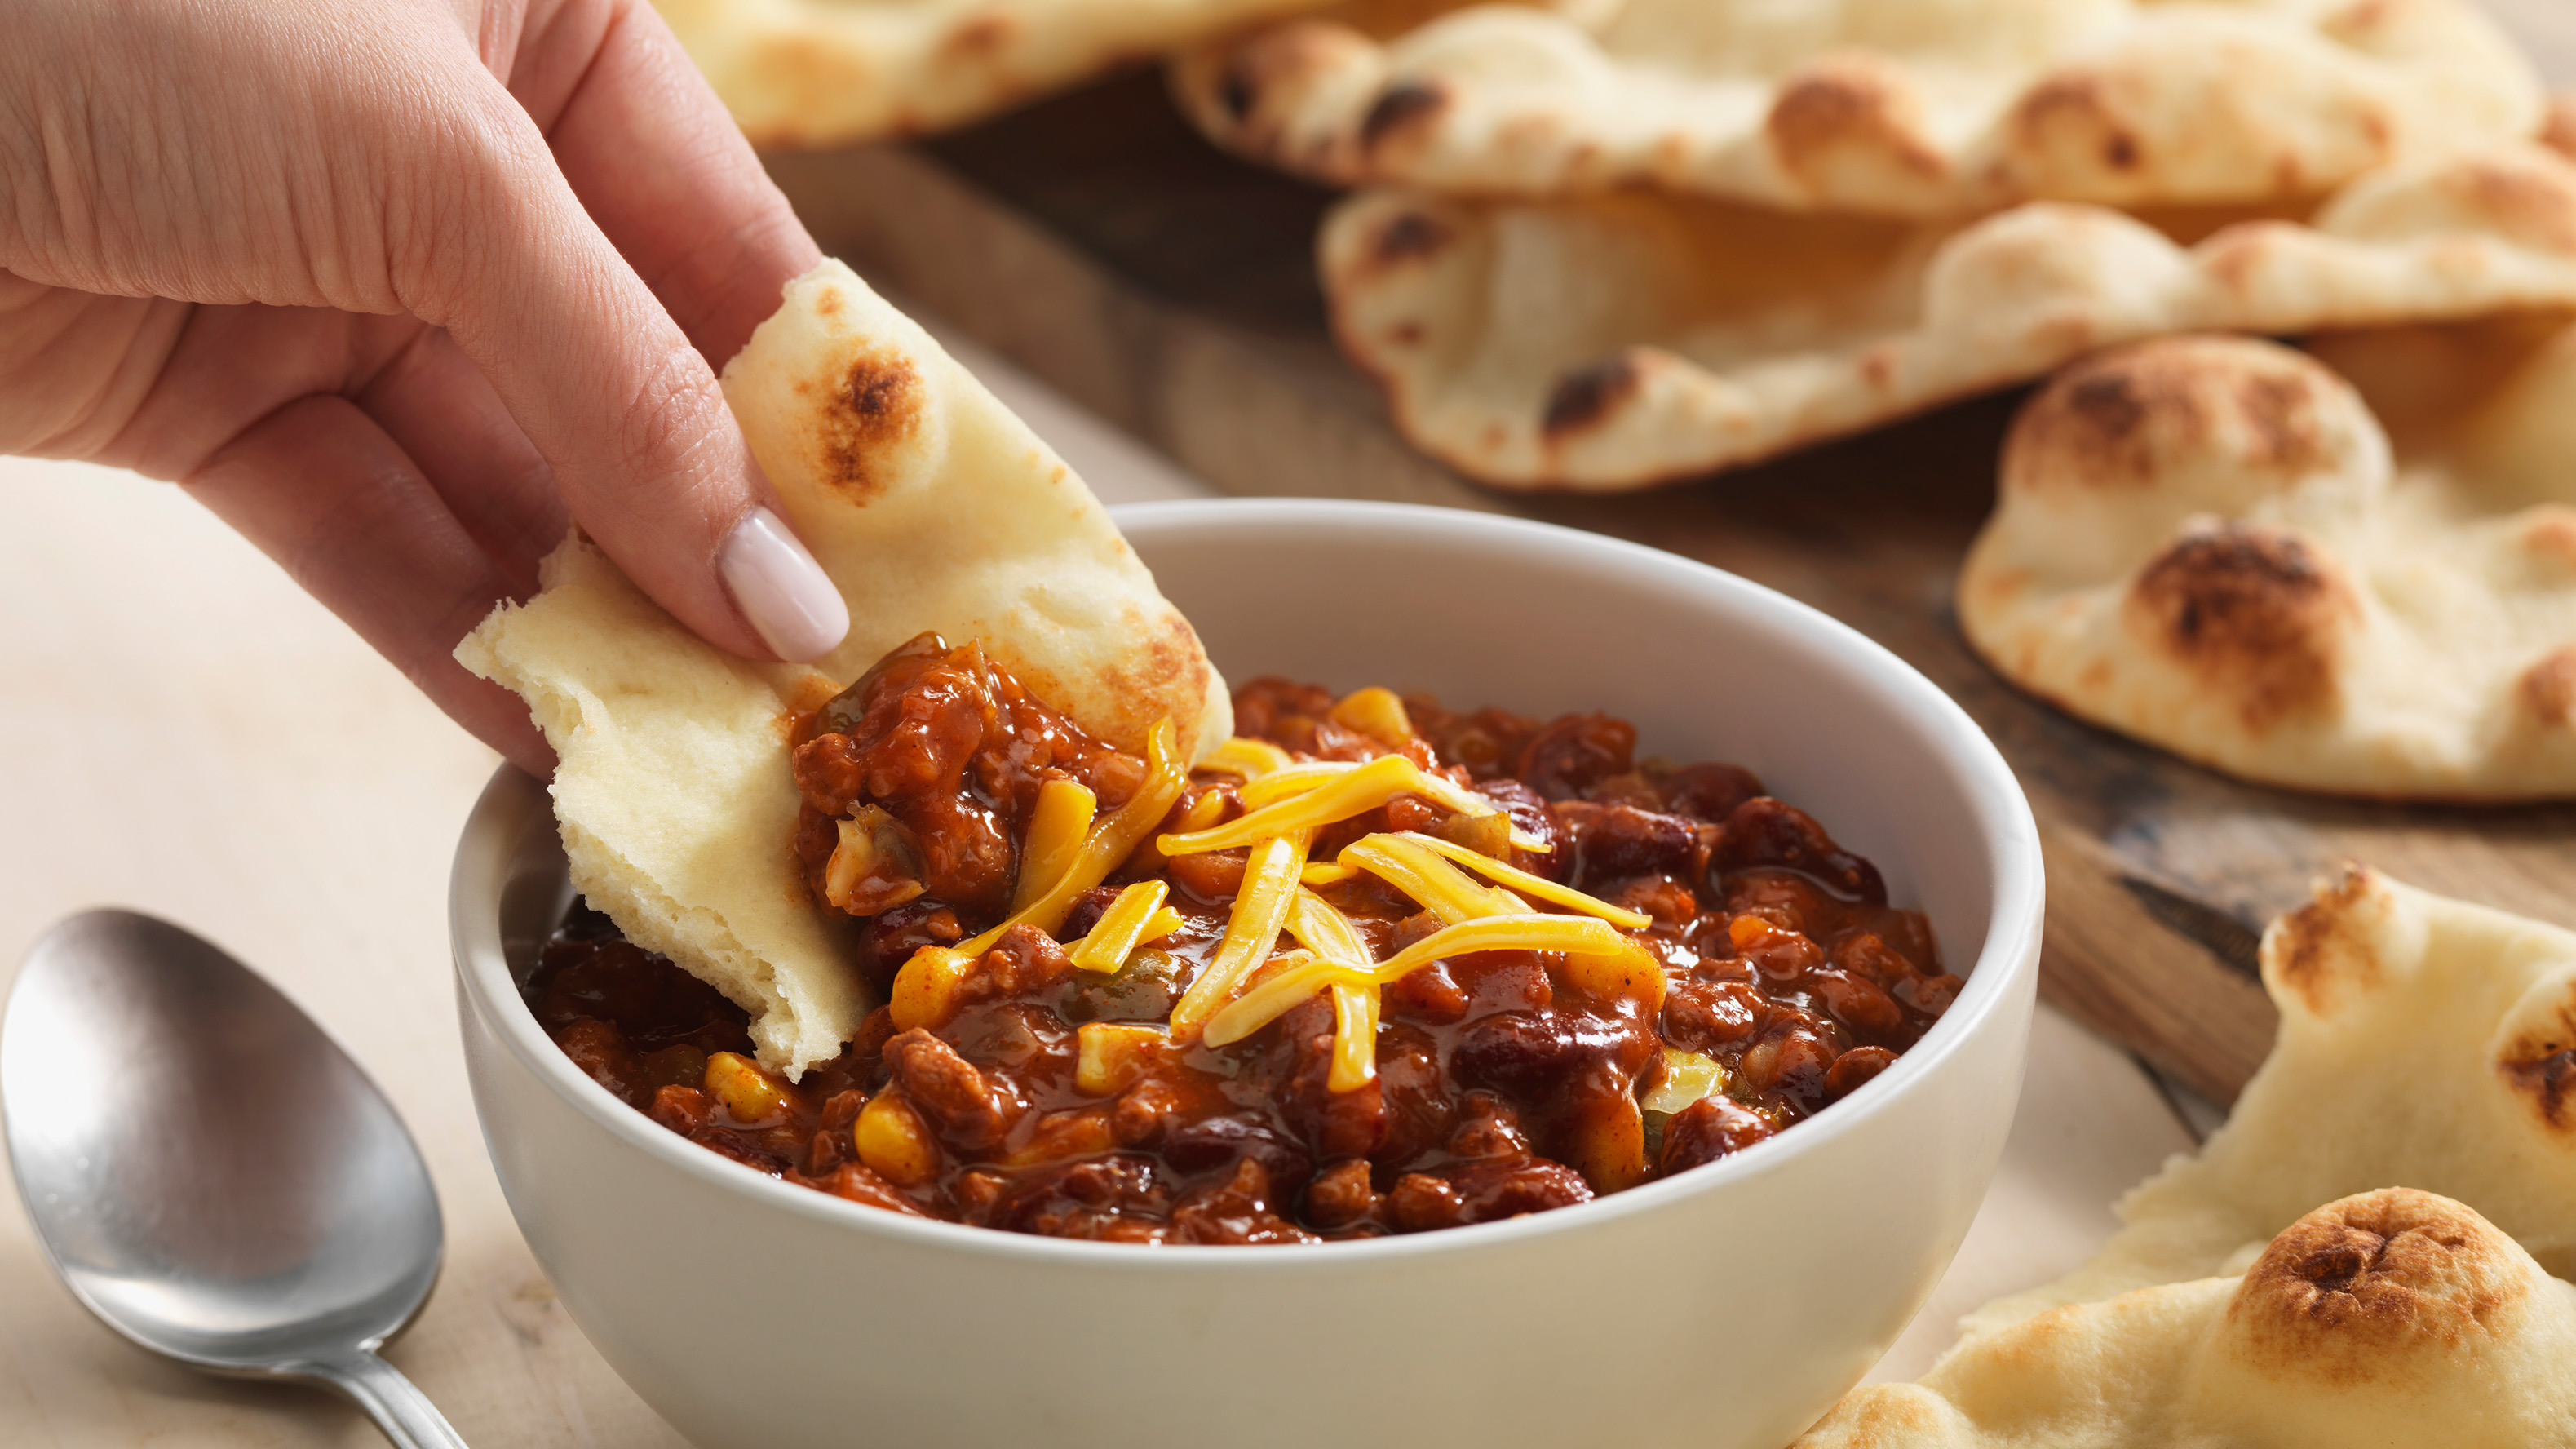 Easy simple and quick chili bowl with naan for dipping